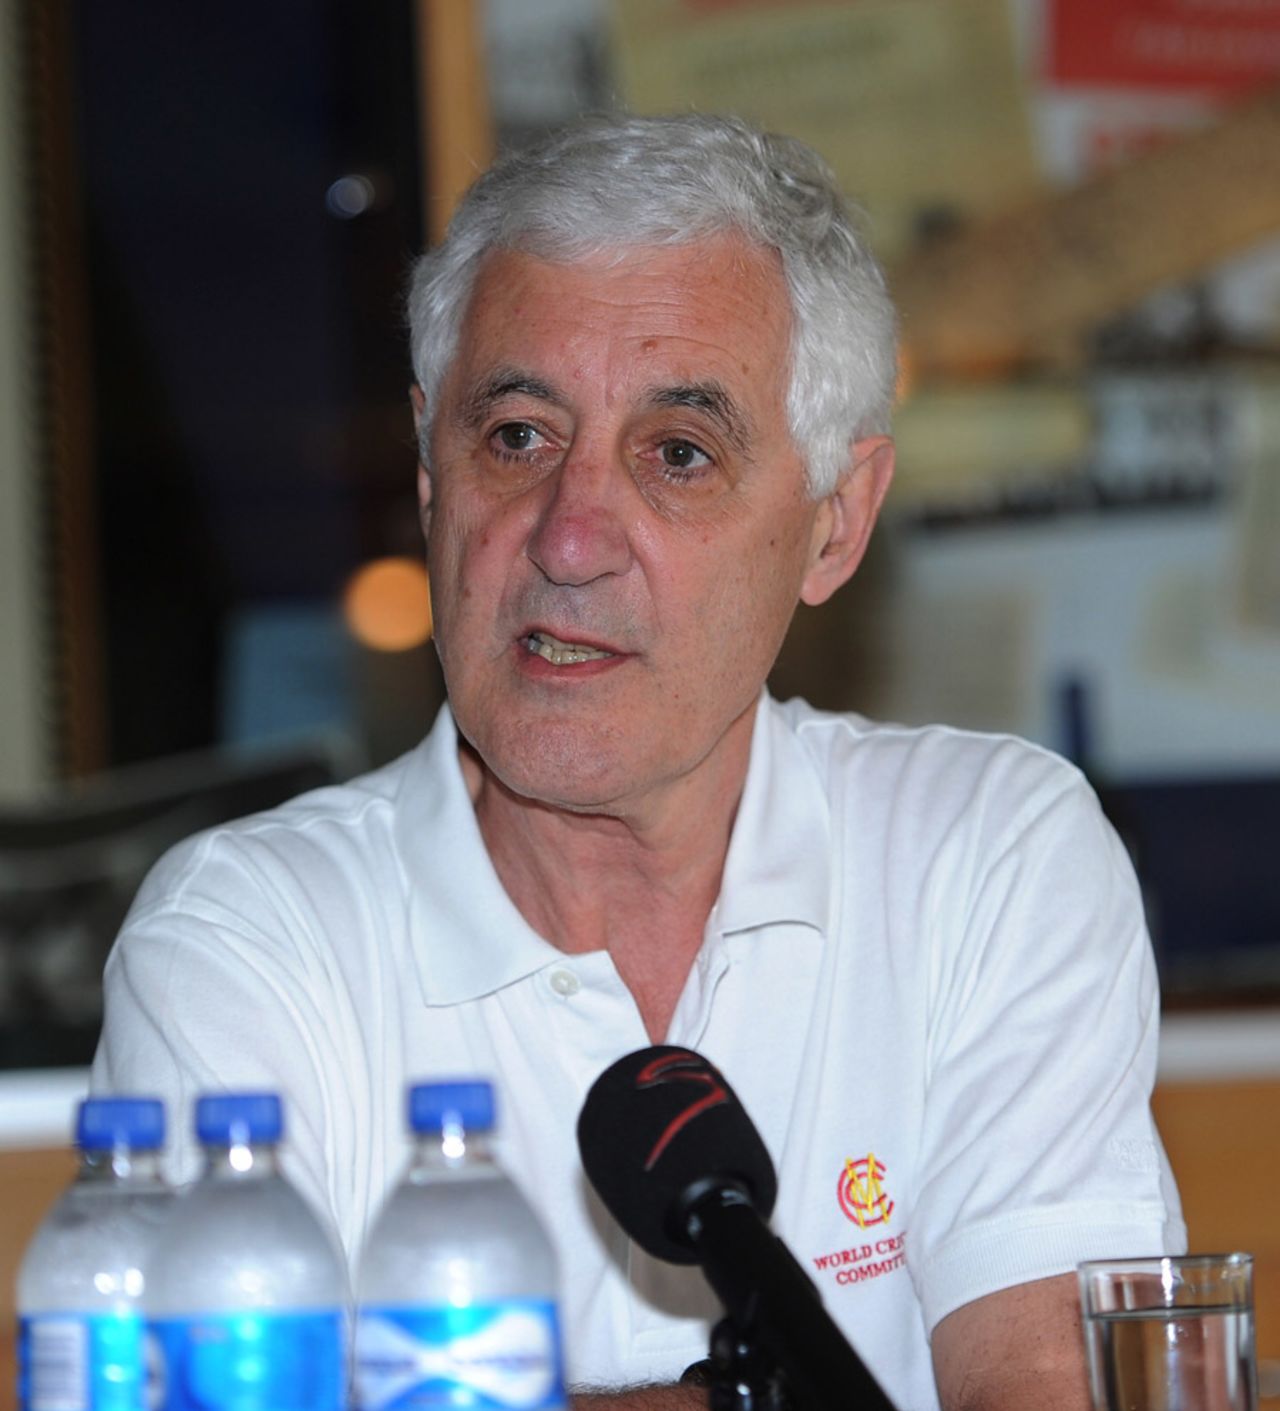 Mike Brearley speaks at the MCC World Cricket Committee media conference, Newlands, Cape Town, South Africa, January 10, 2012